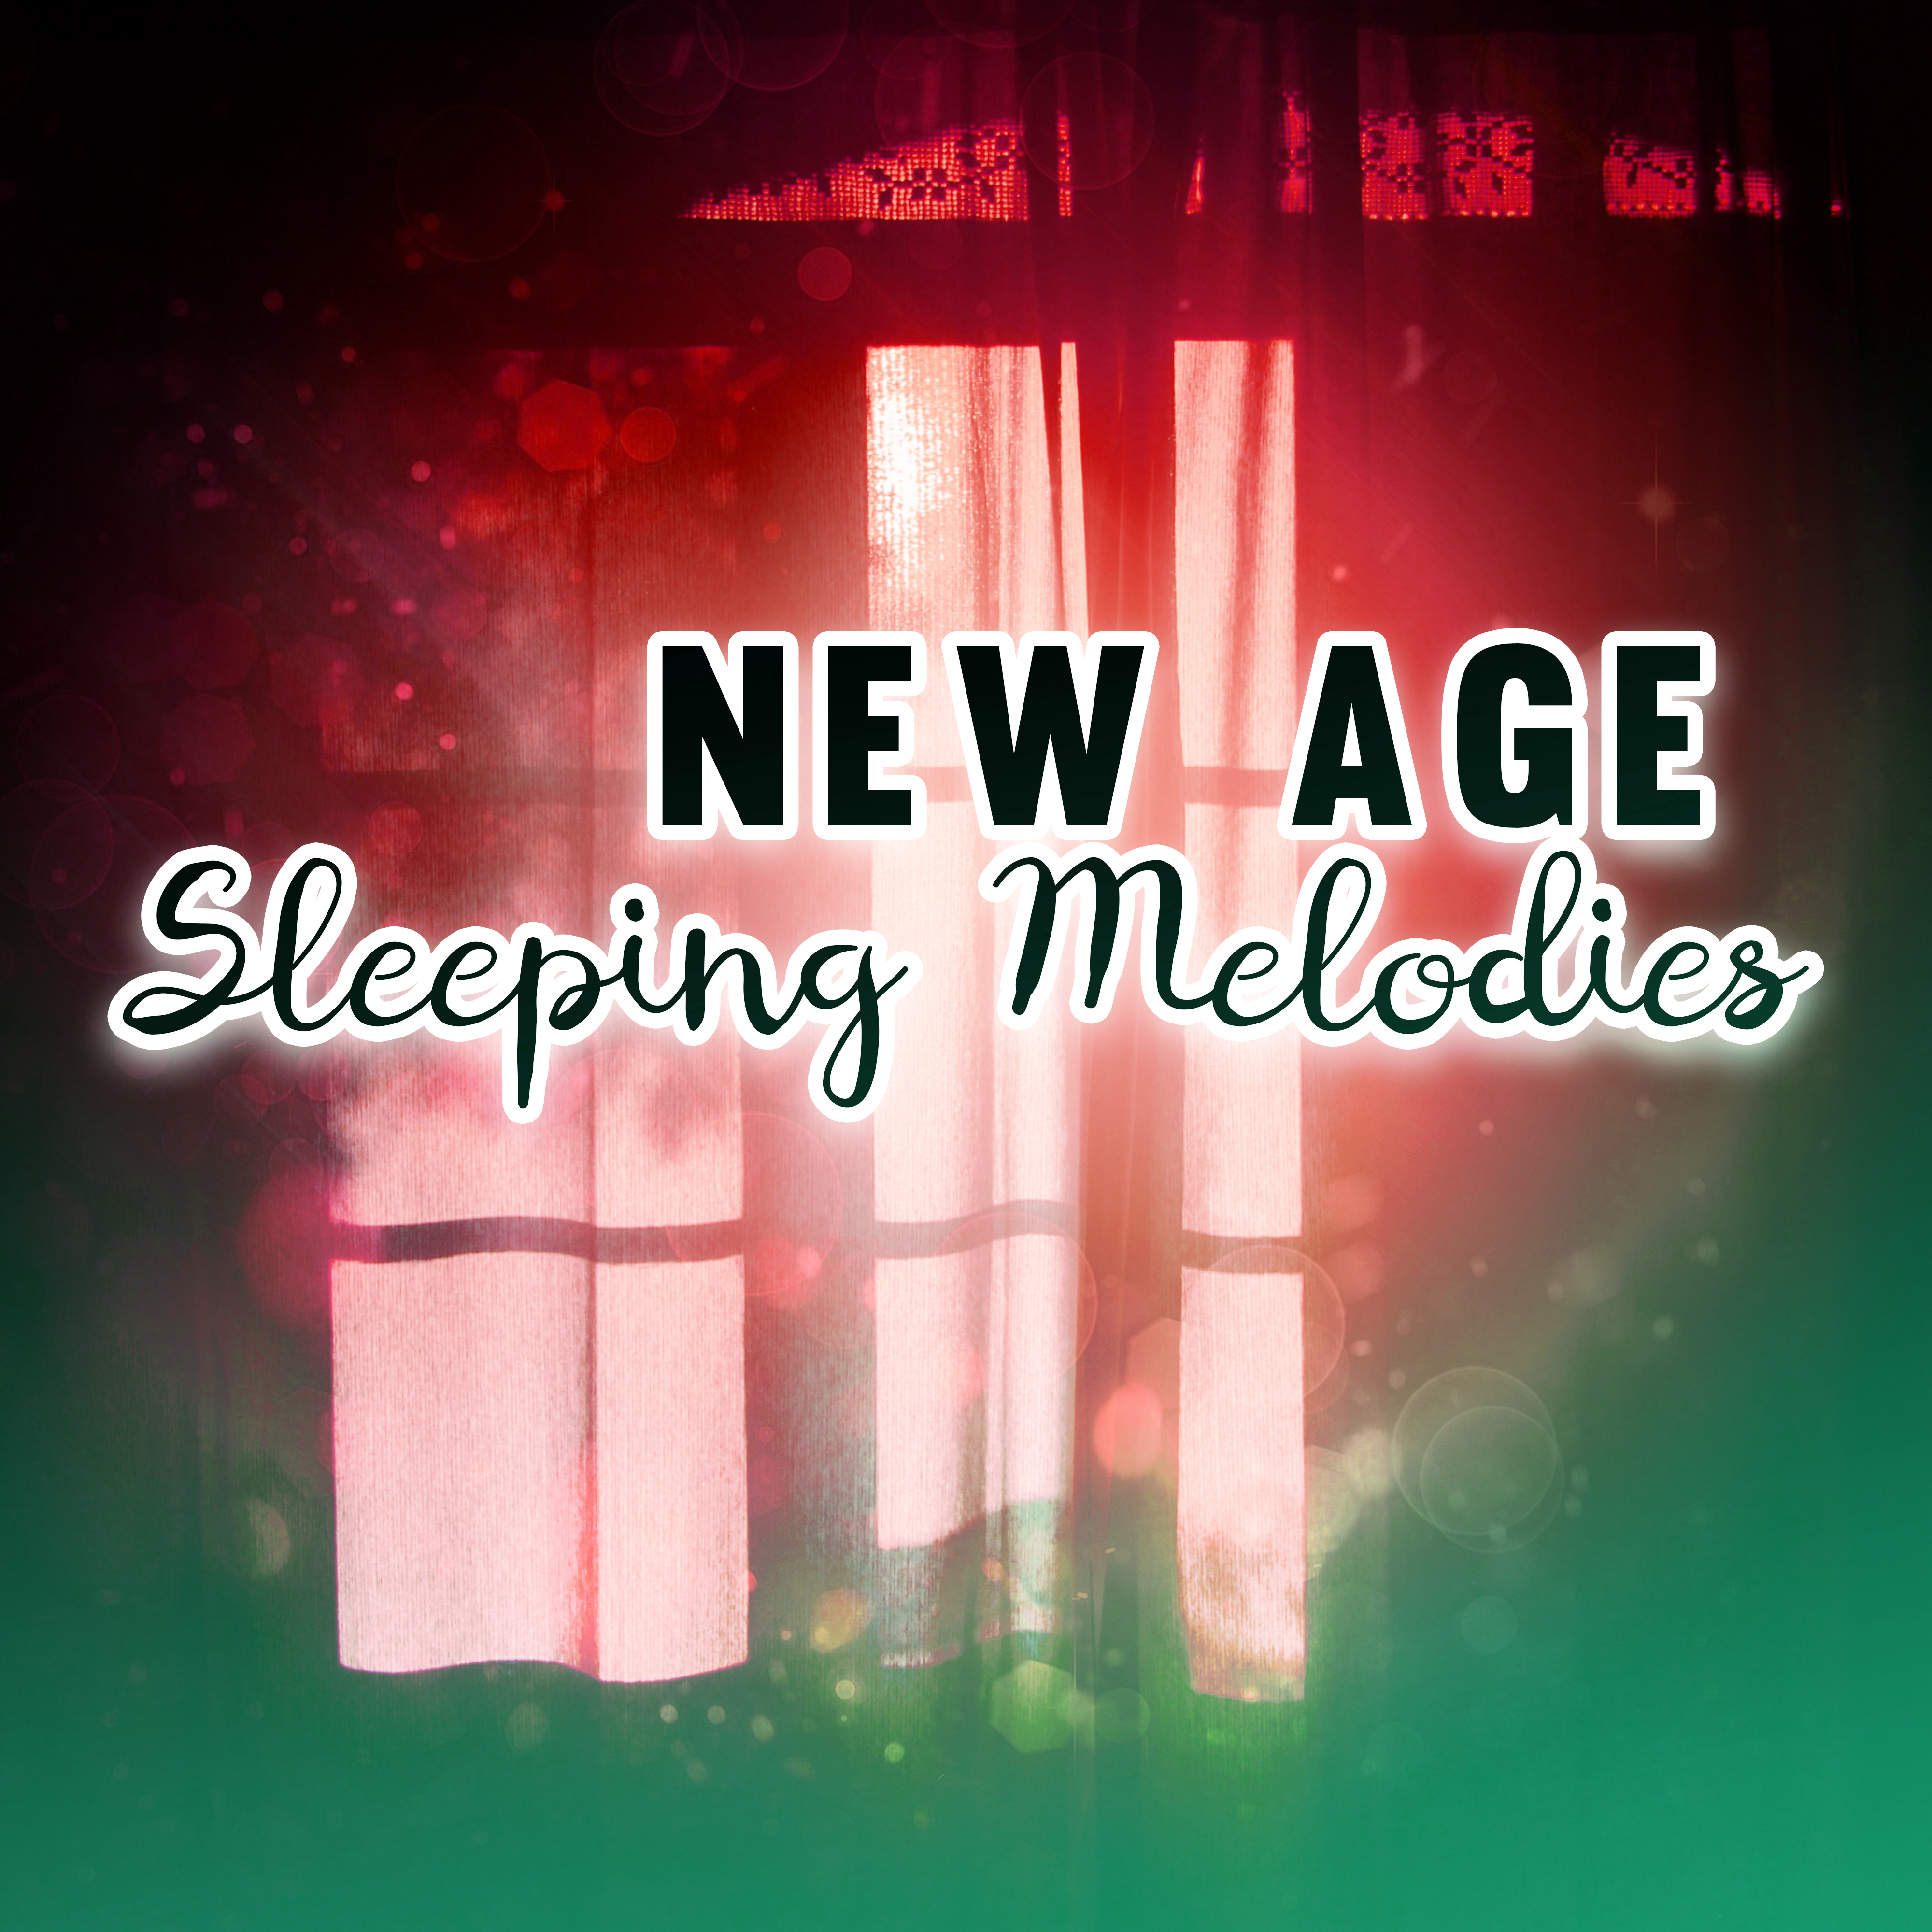 New Age Sleeping Melodies – Easy Listening, Stress Relief, Mind Calmness, Fall Asleep